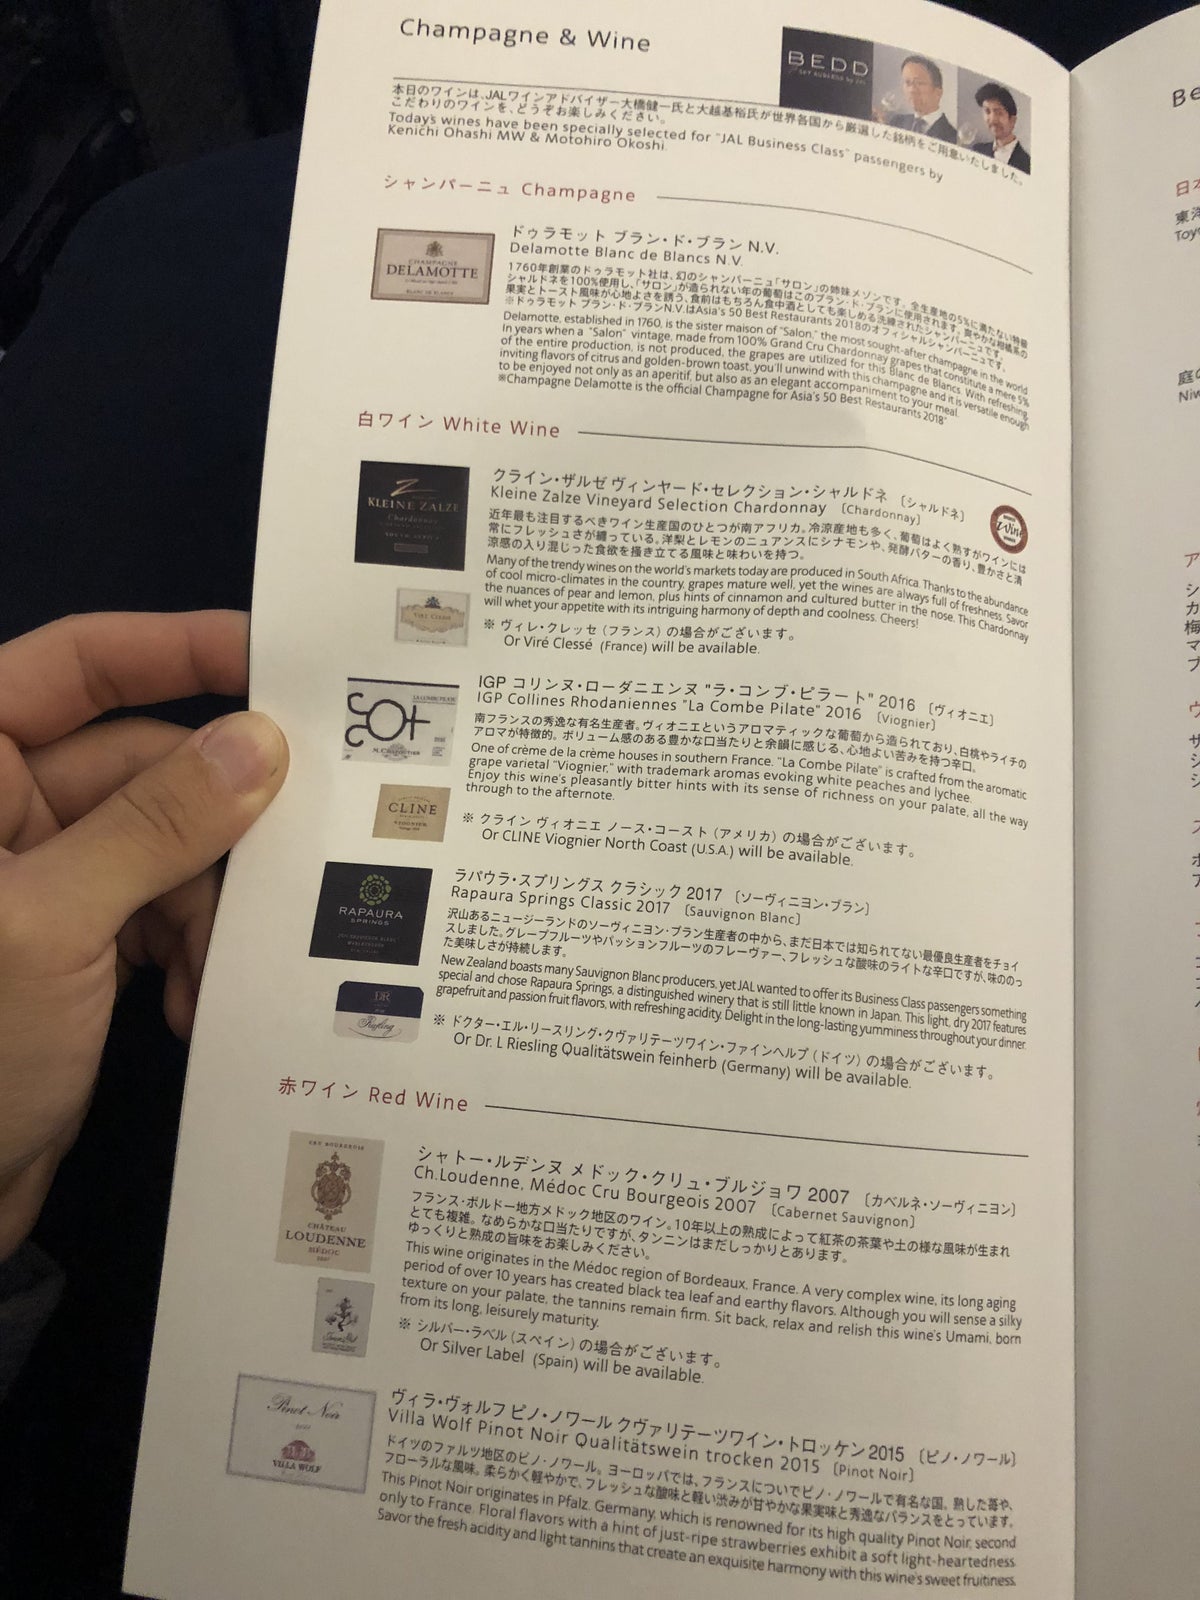 Japan Airlines 777 Business Class Champagne and Wine Menu